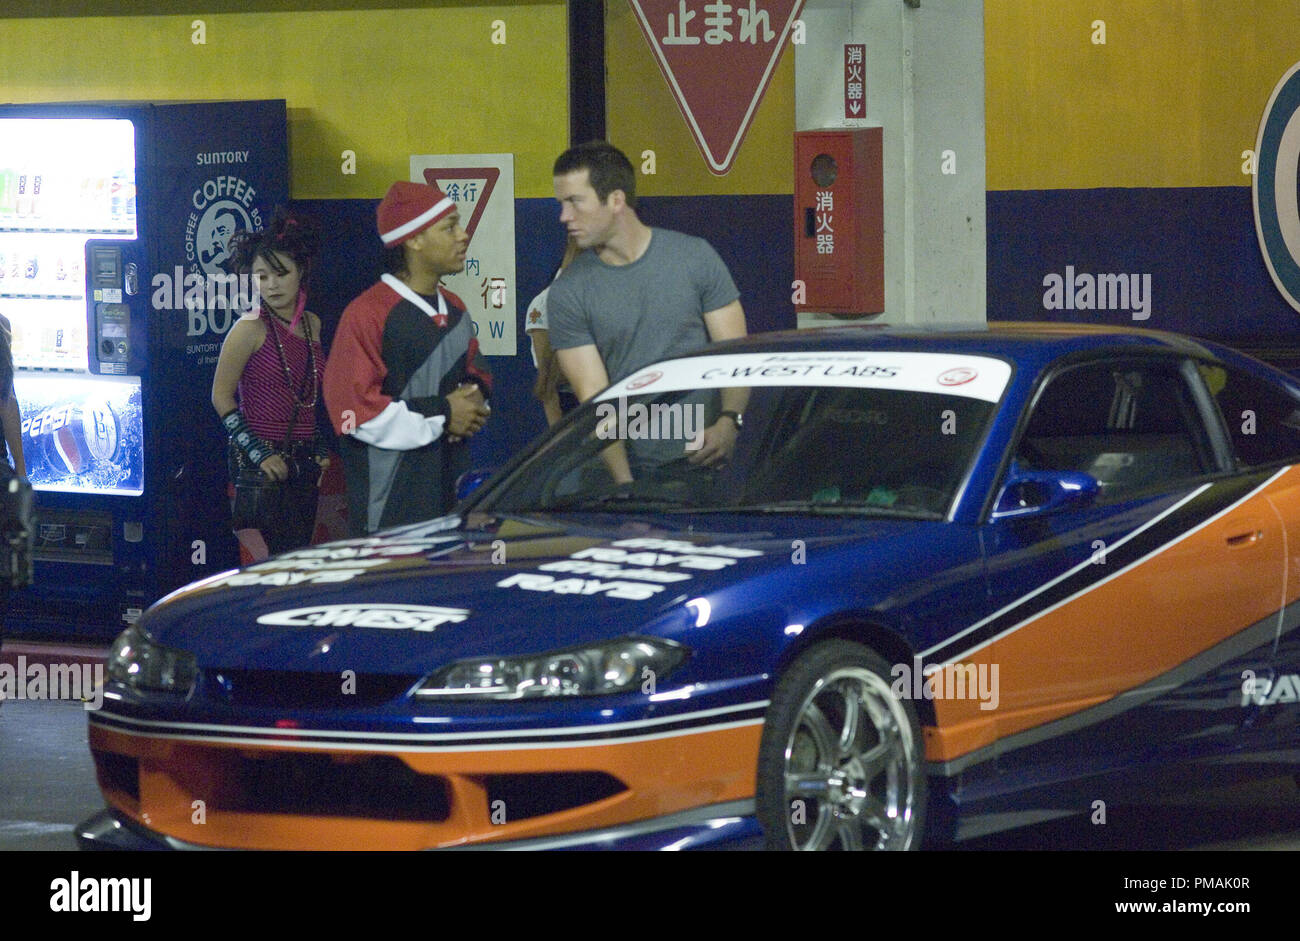 L to R, foreground) Twinkie (BOW WOW) and underdog street racer Sean  Boswell (LUCAS BLACK) outside of an '01 Nissan Silvia S15 "The Fast and the  Furious: Tokyo Drift" (2006 Stock Photo - Alamy